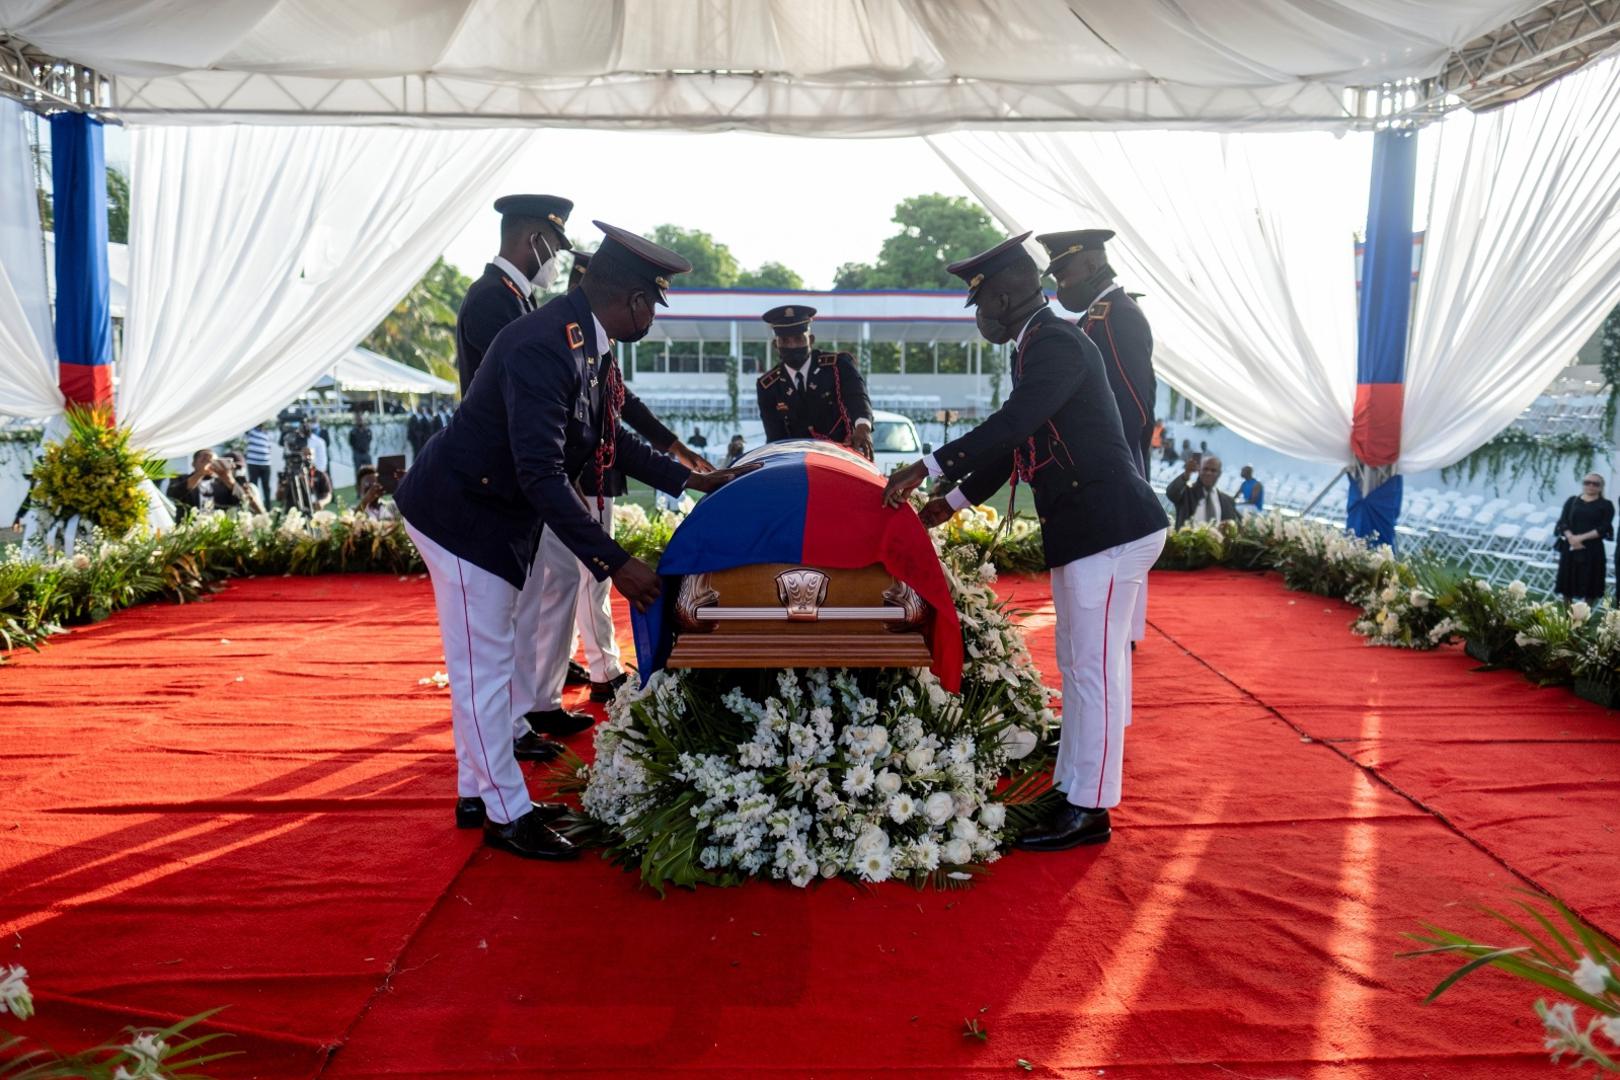 Haiti holds funeral for assassinated President Jovenel Moise in Cap-Haitien Presidential honor guards place a national flag over the coffin of late Haitian President Jovenel Moise, who was shot dead earlier this month, during the funeral at his family home in Cap-Haitien, Haiti, July 23, 2021. REUTERS/Ricardo Arduengo RICARDO ARDUENGO